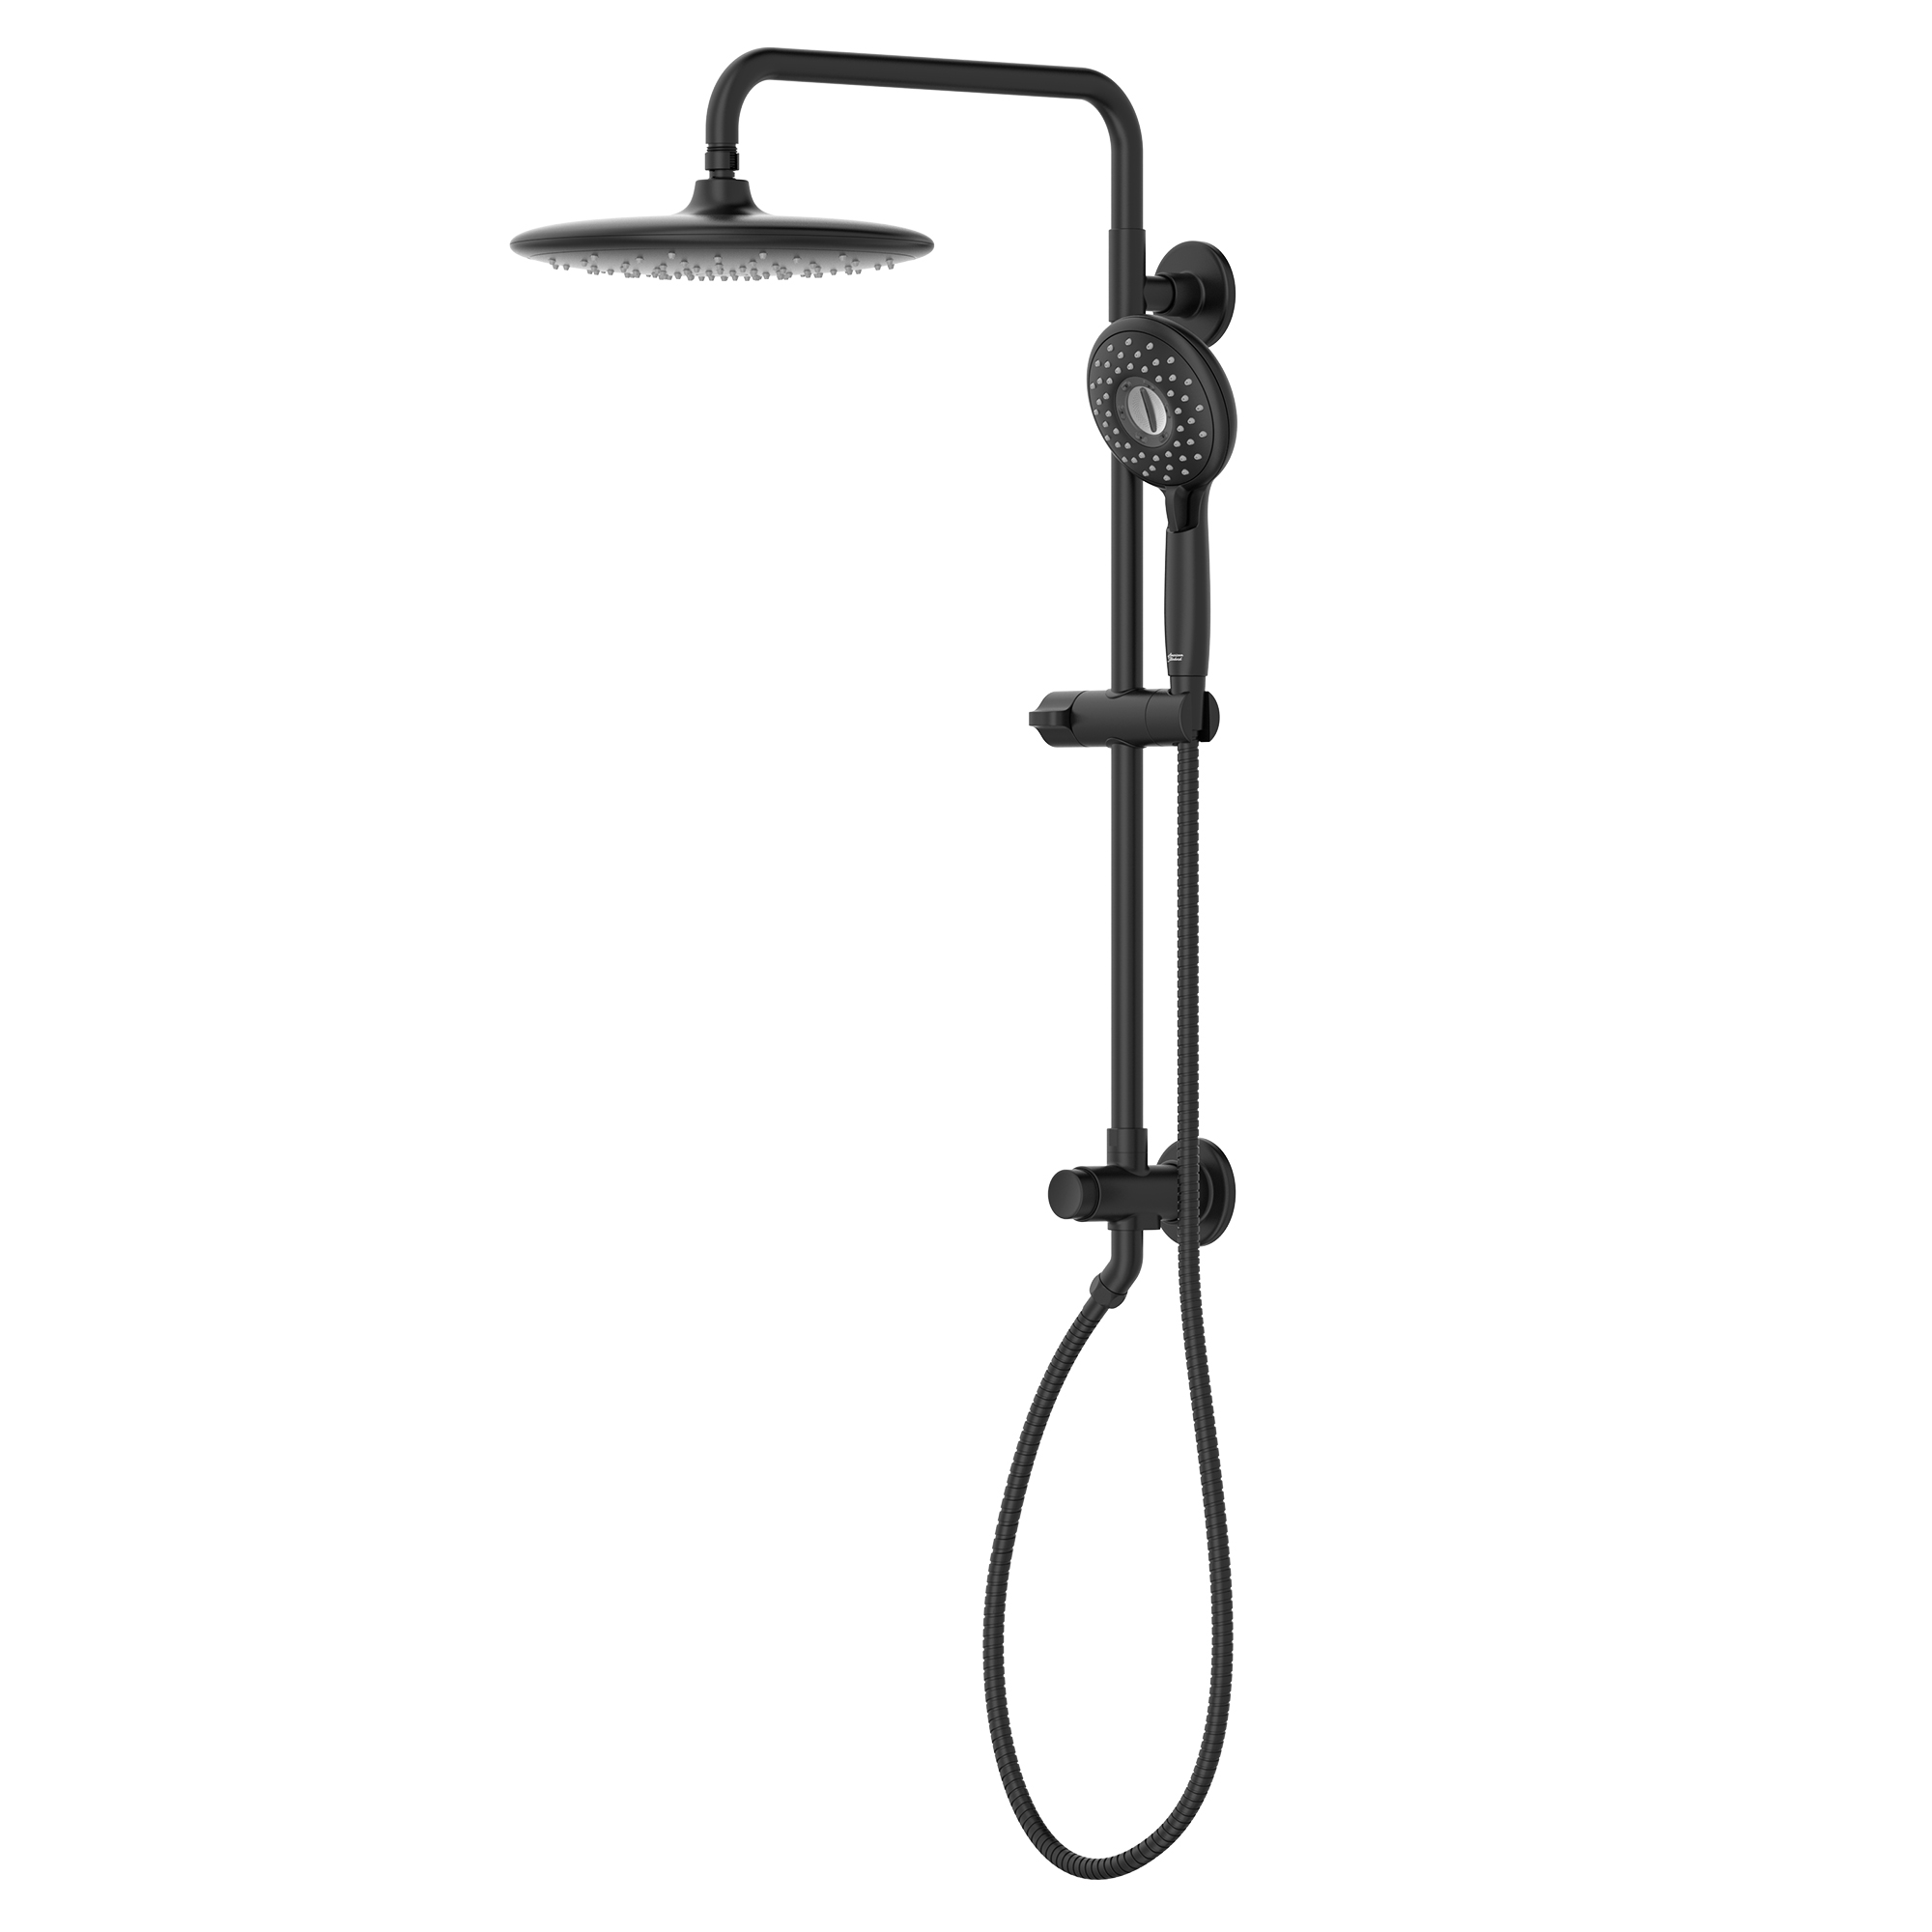 Spectra Versa® 24-Inch 4-Function 1.8 gpm/6.8 L/min Shower System With Rain Showerhead